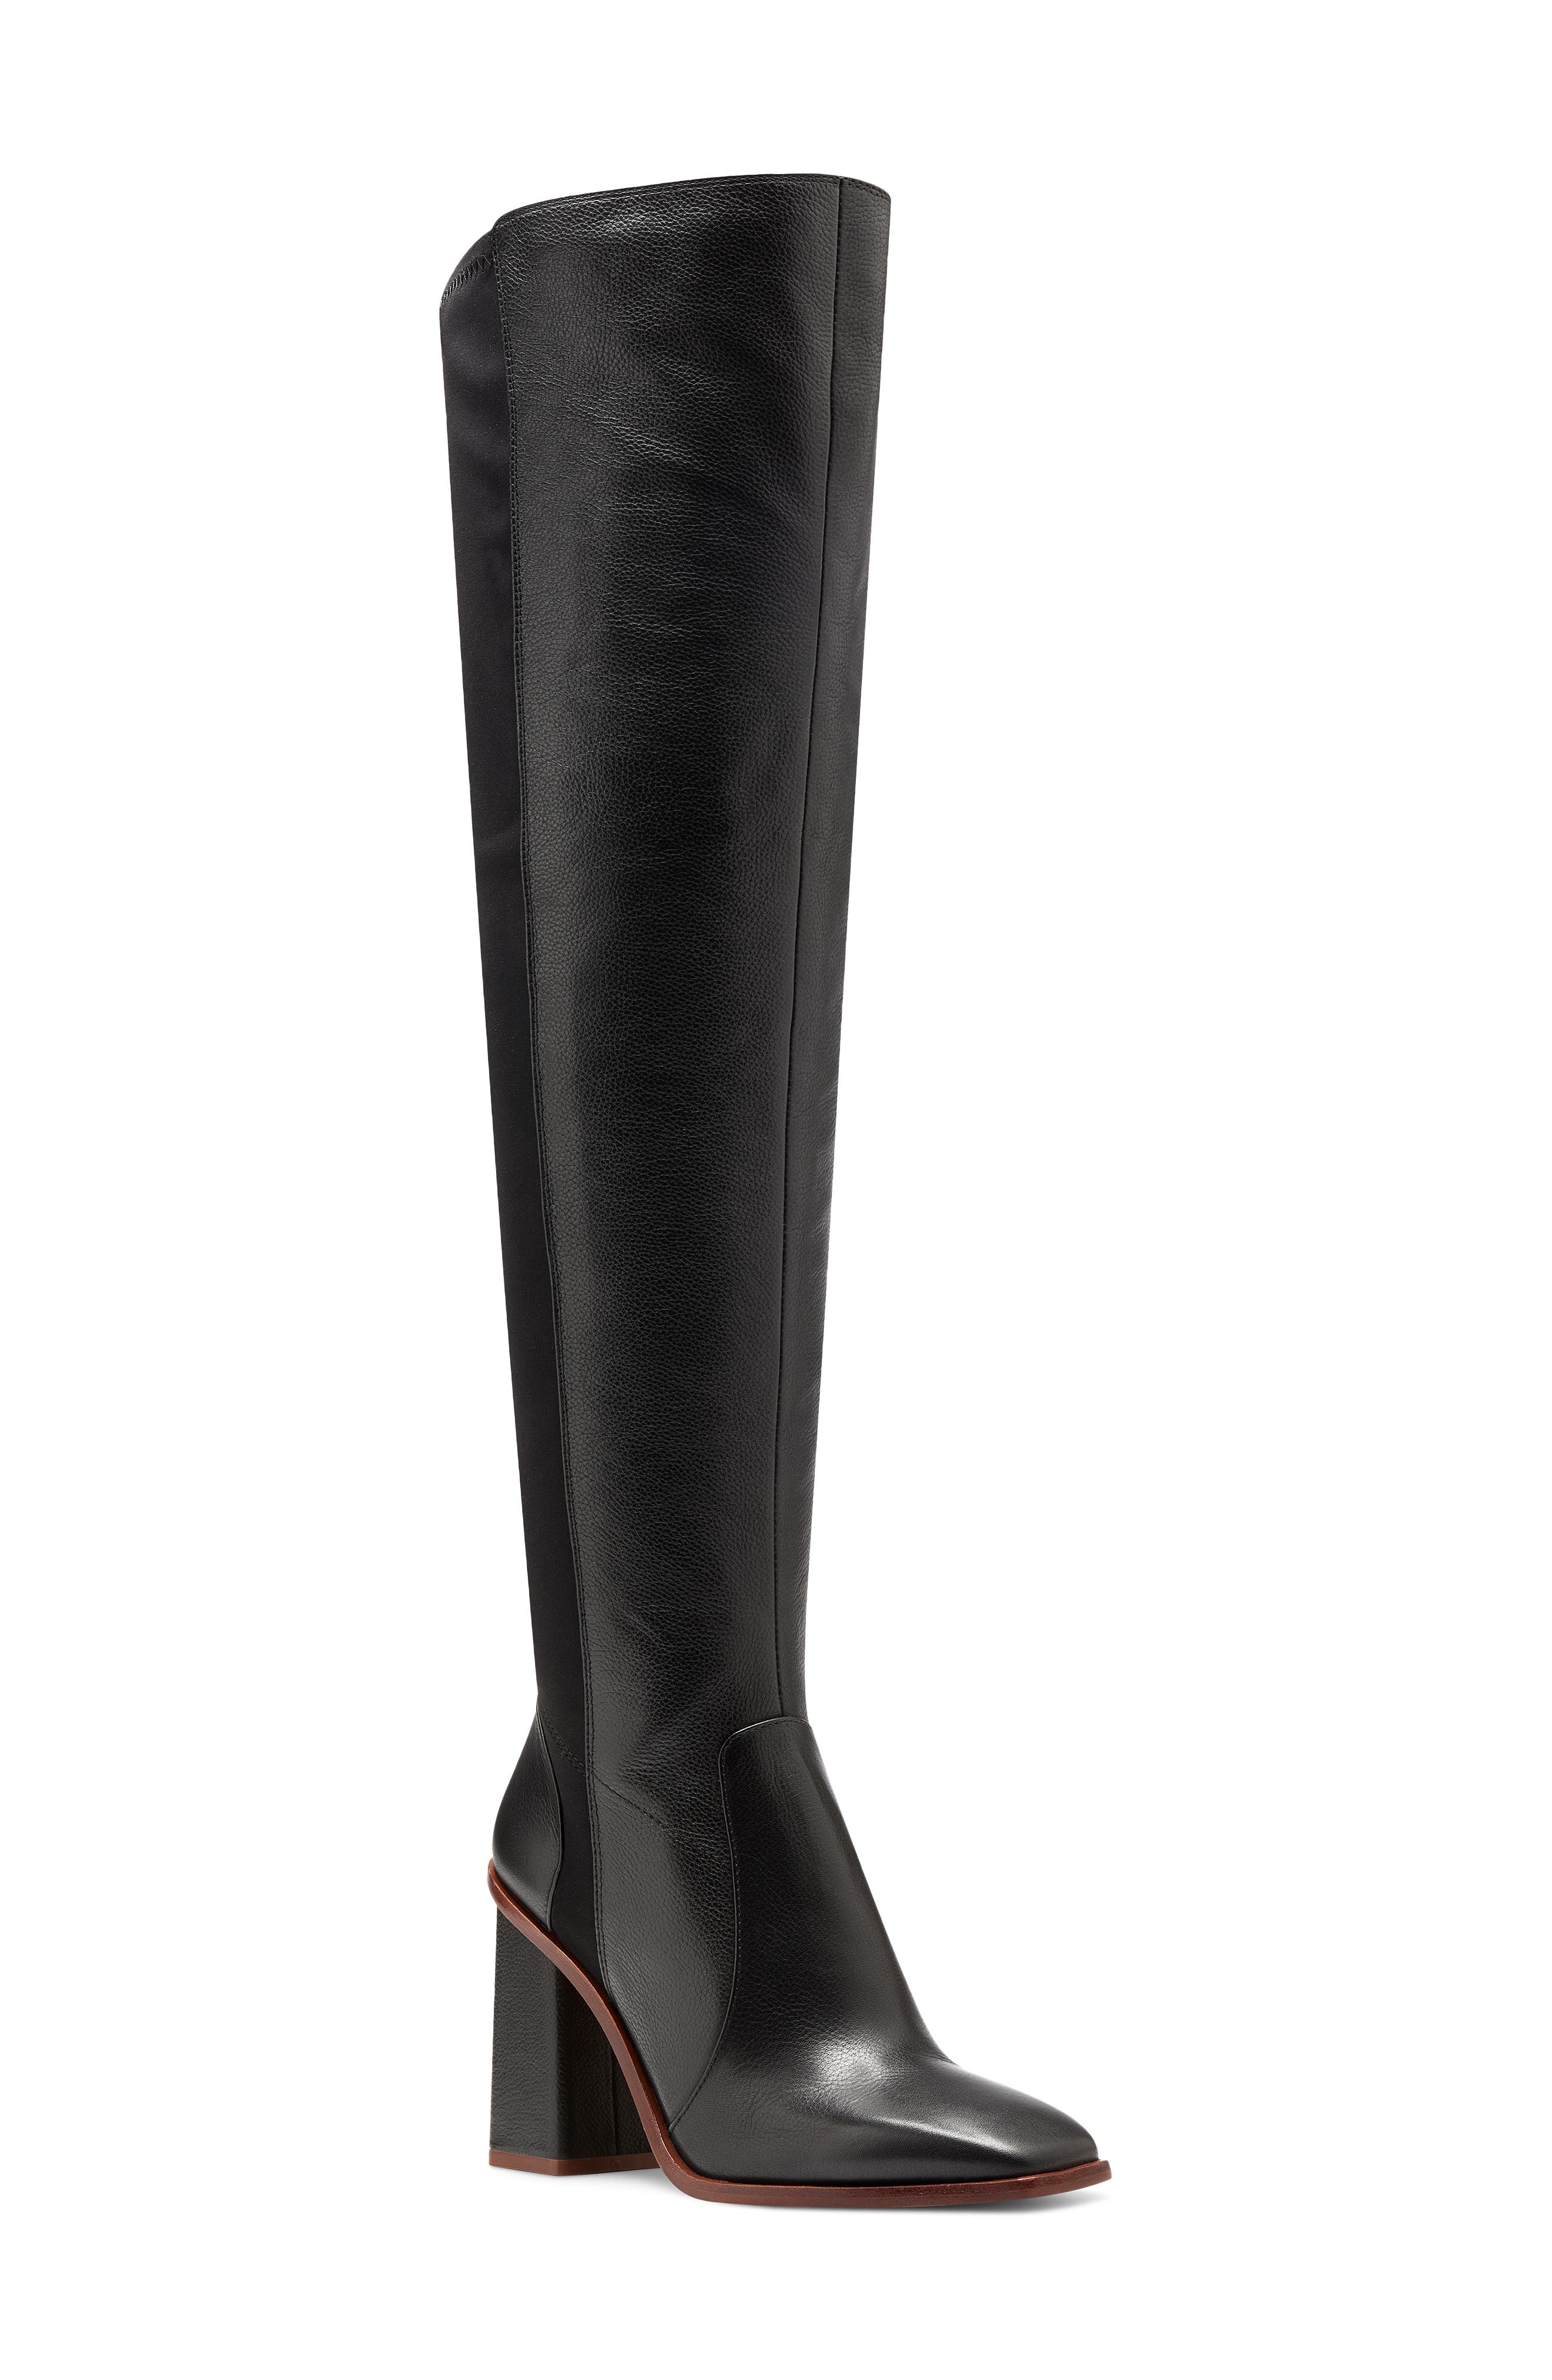 UPC 194307349563 product image for Women's Vince Camuto Dreven Over The Knee Boot, Size 7.5 M - Black | upcitemdb.com